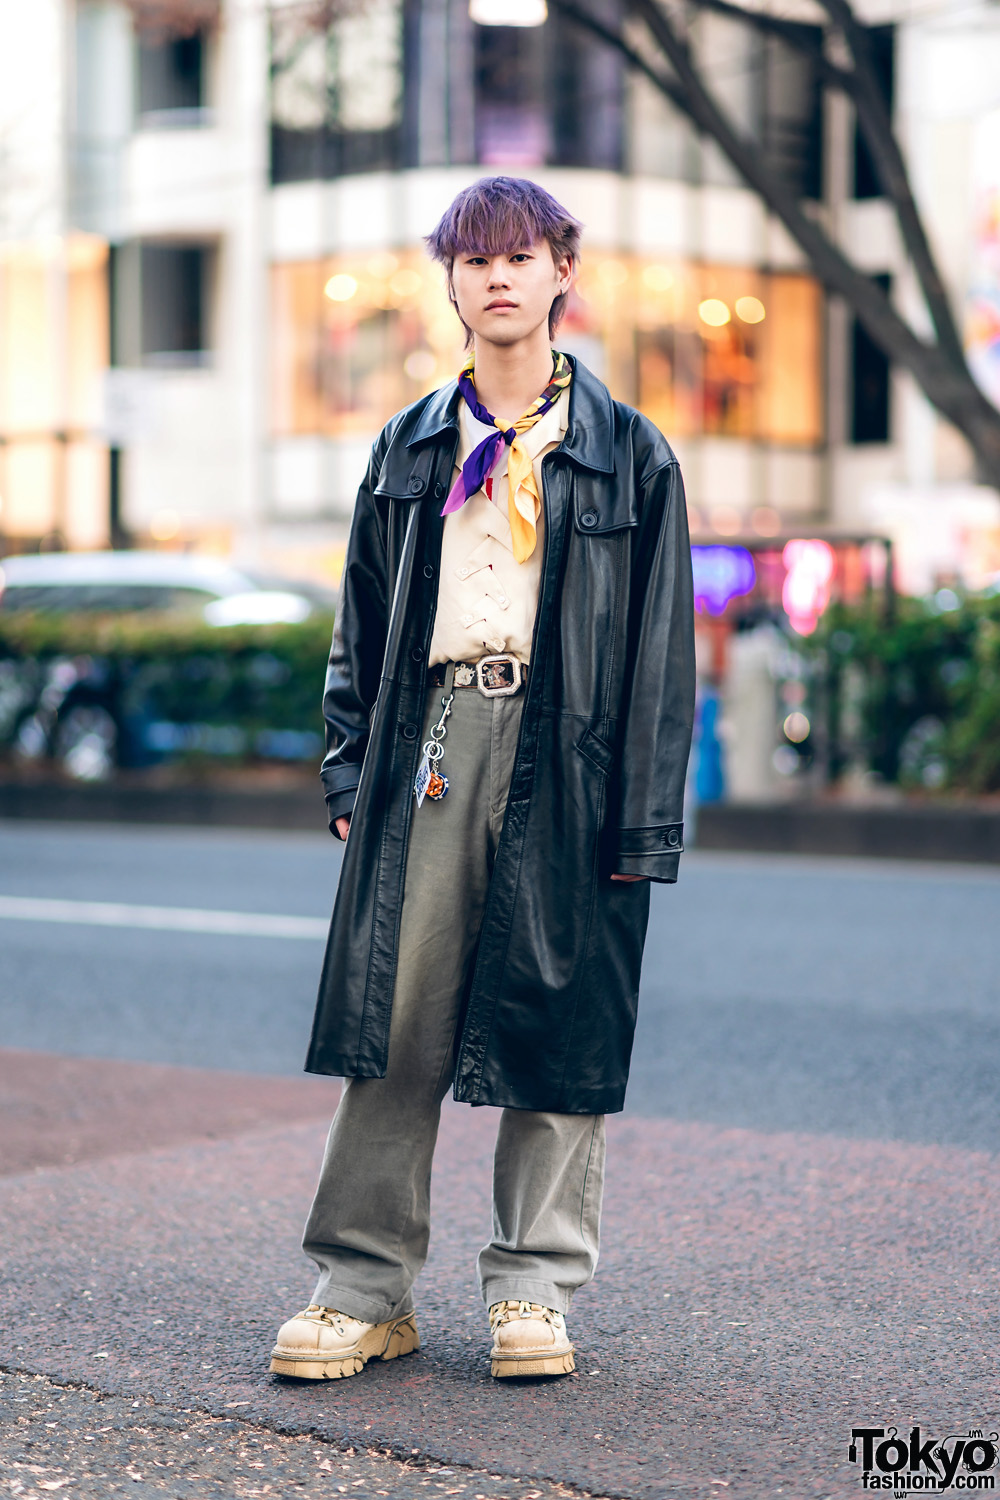 Harajuku Street Style w/ Purple Hair, Vaquera Neckerchief, Leather Trench Coat, Vejas Braided Shirt & New Rock Shoes